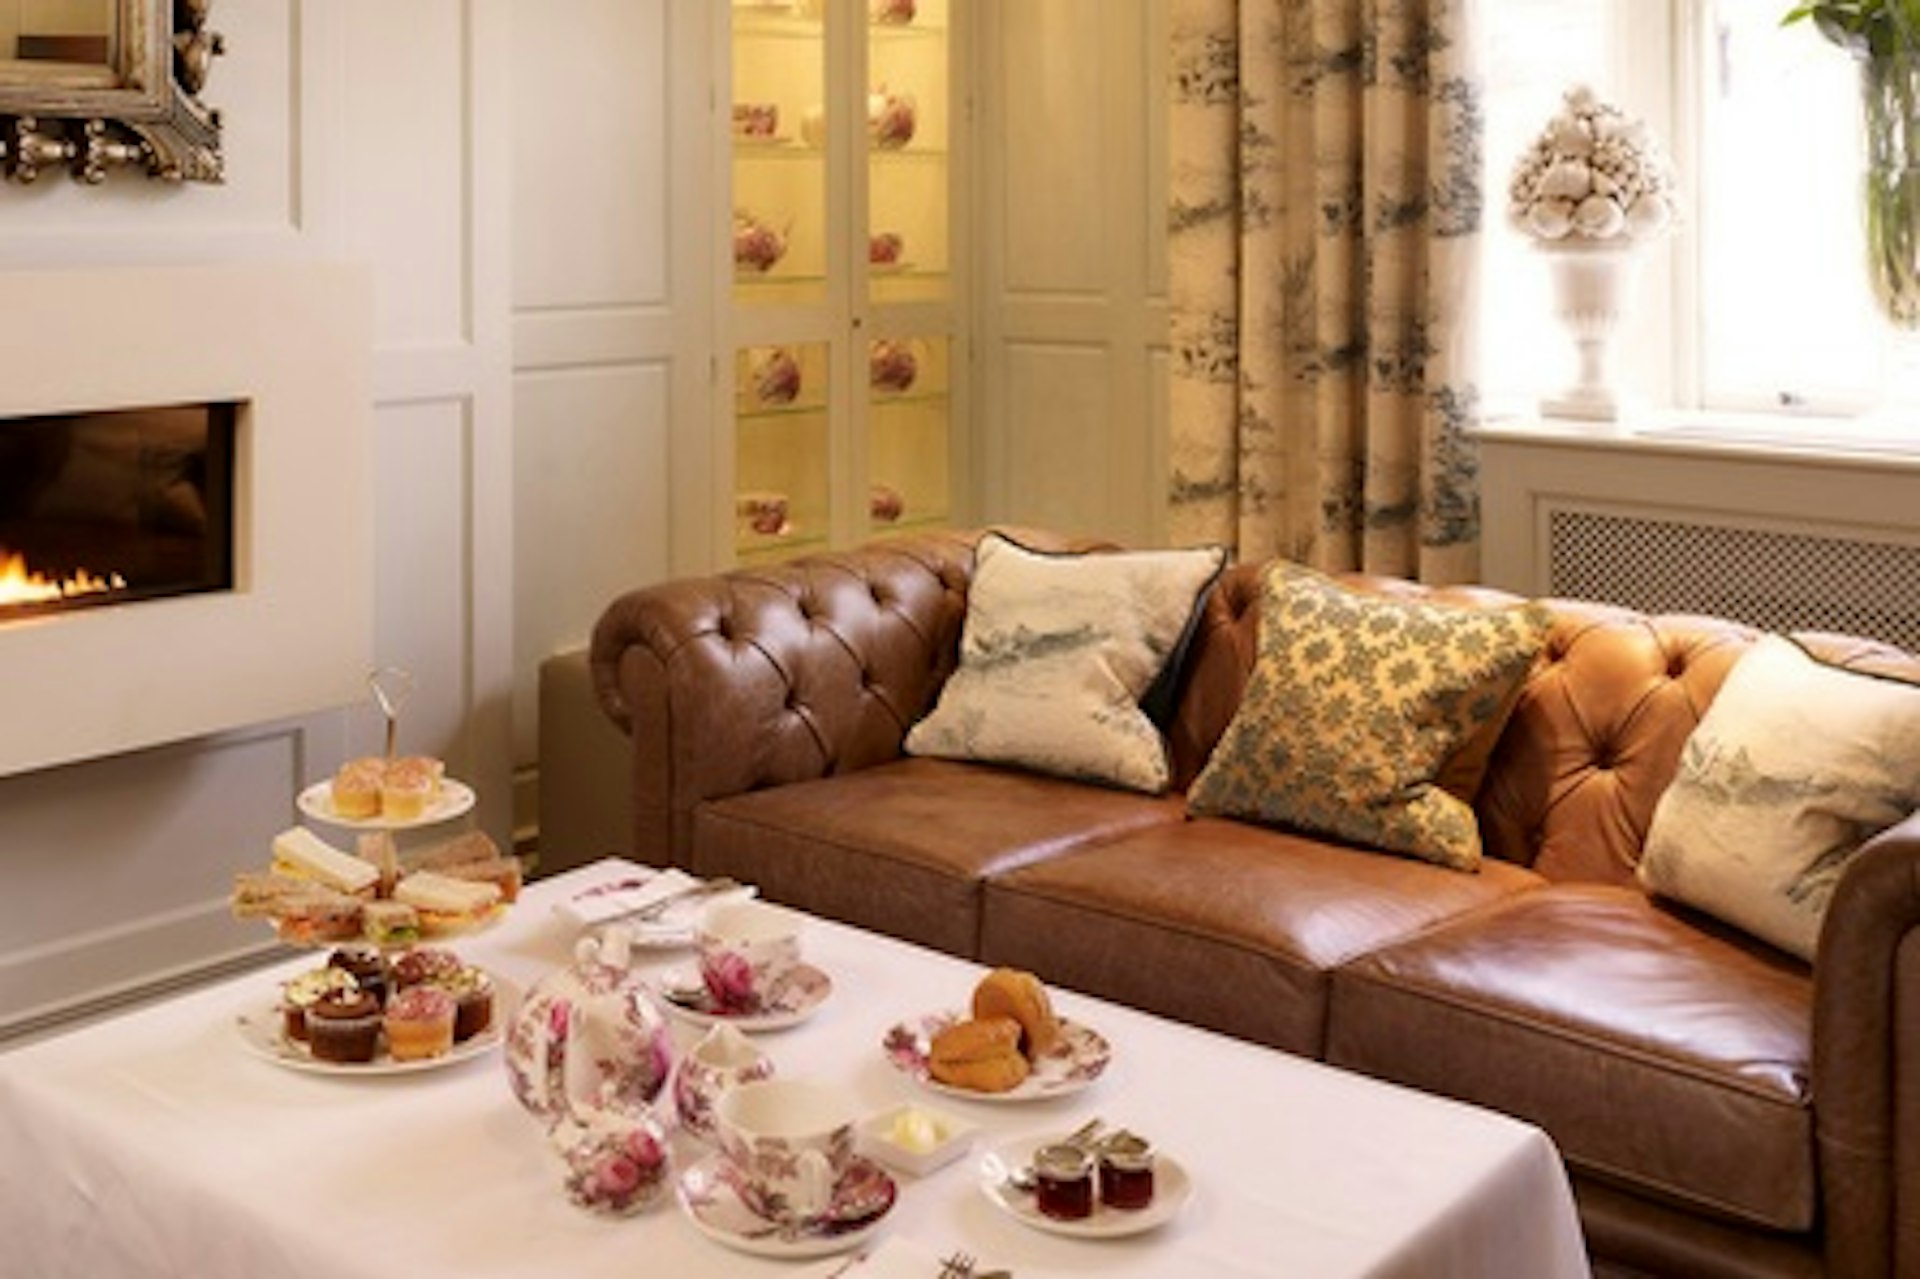 Afternoon Tea for Two at The Arden Hotel in Historic Stratford-upon-Avon 1